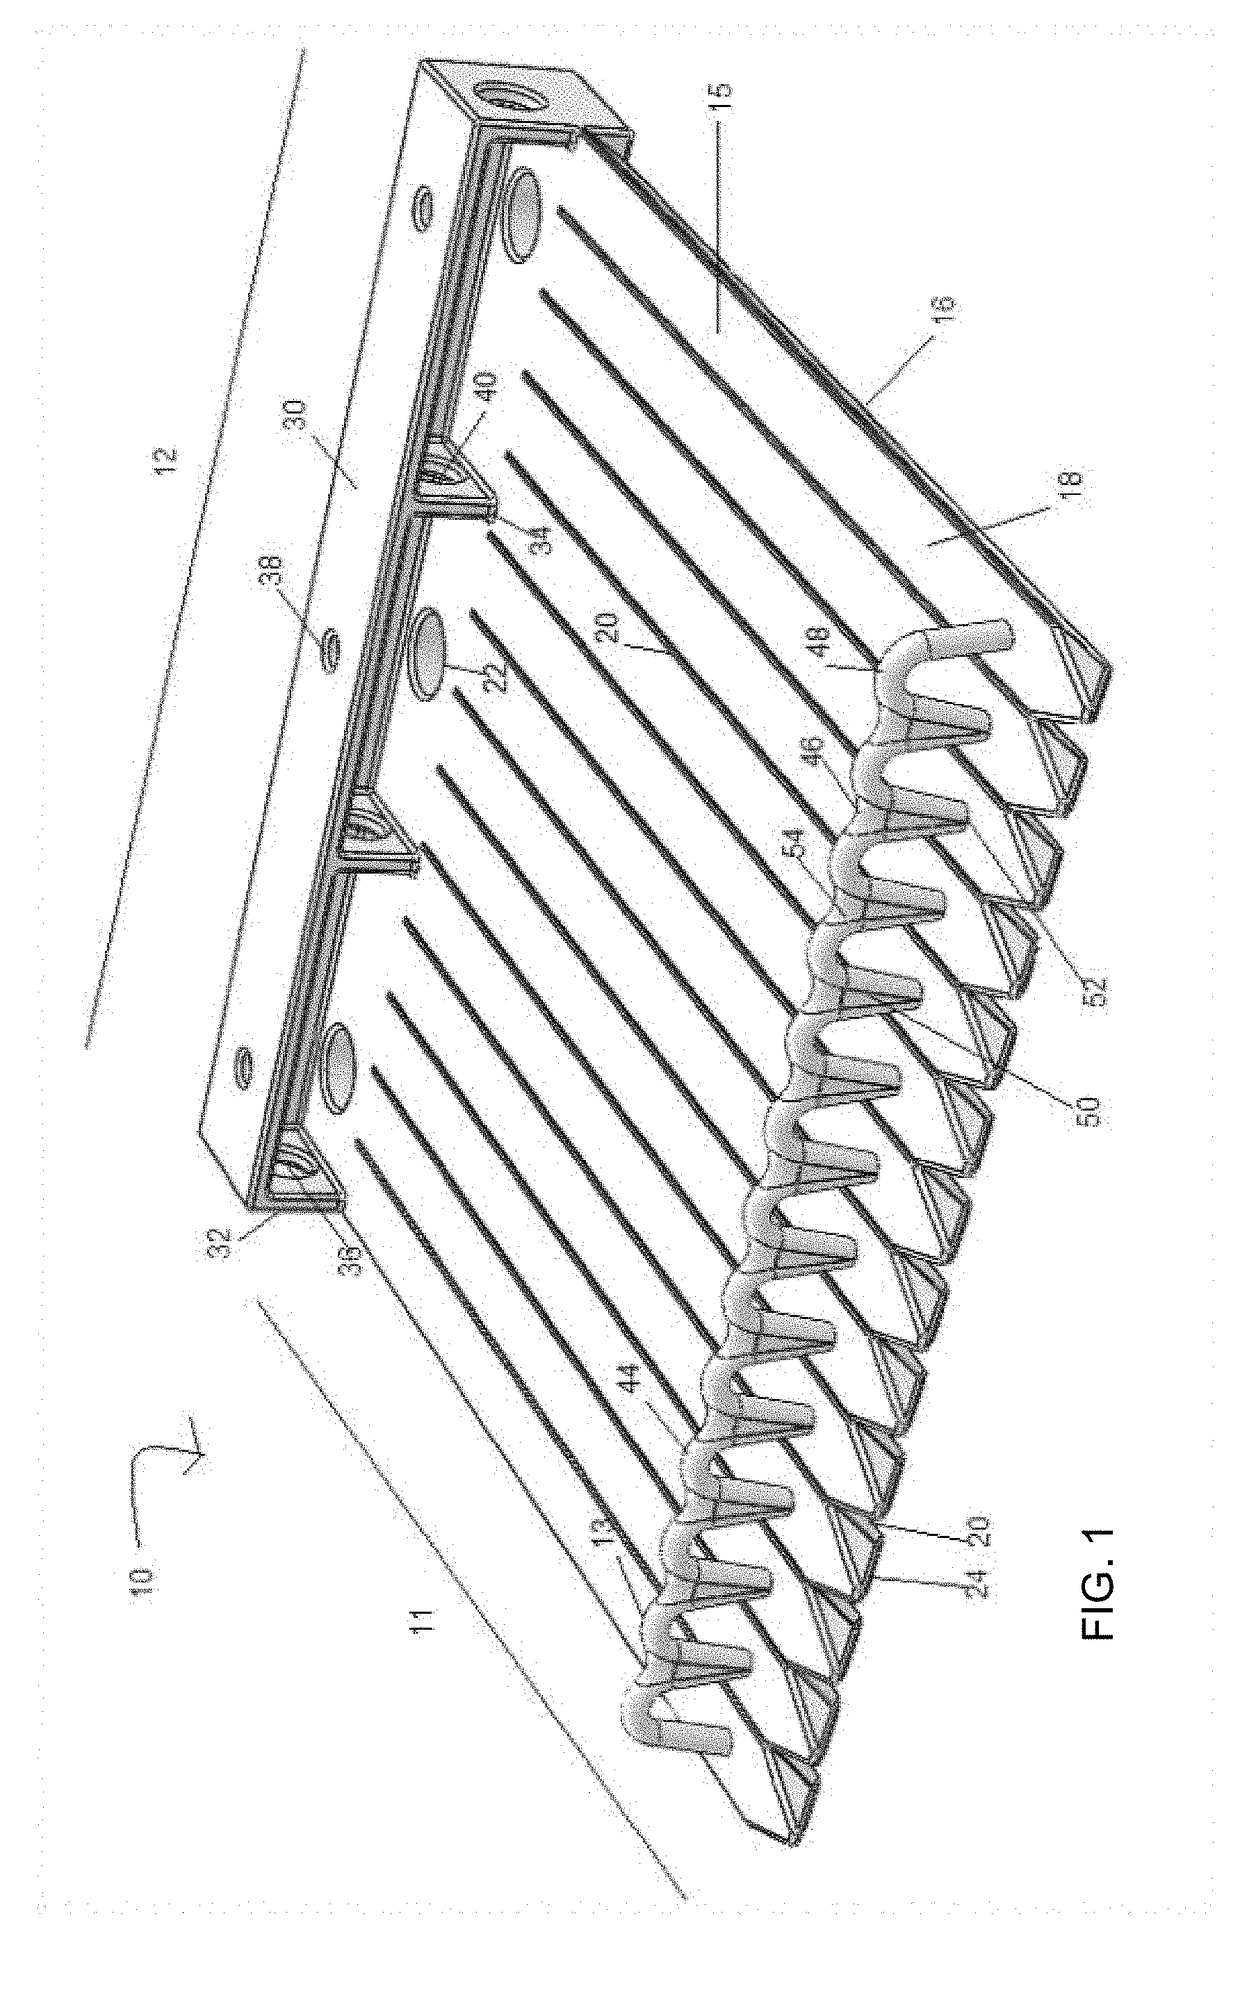 Device for holding storage bags